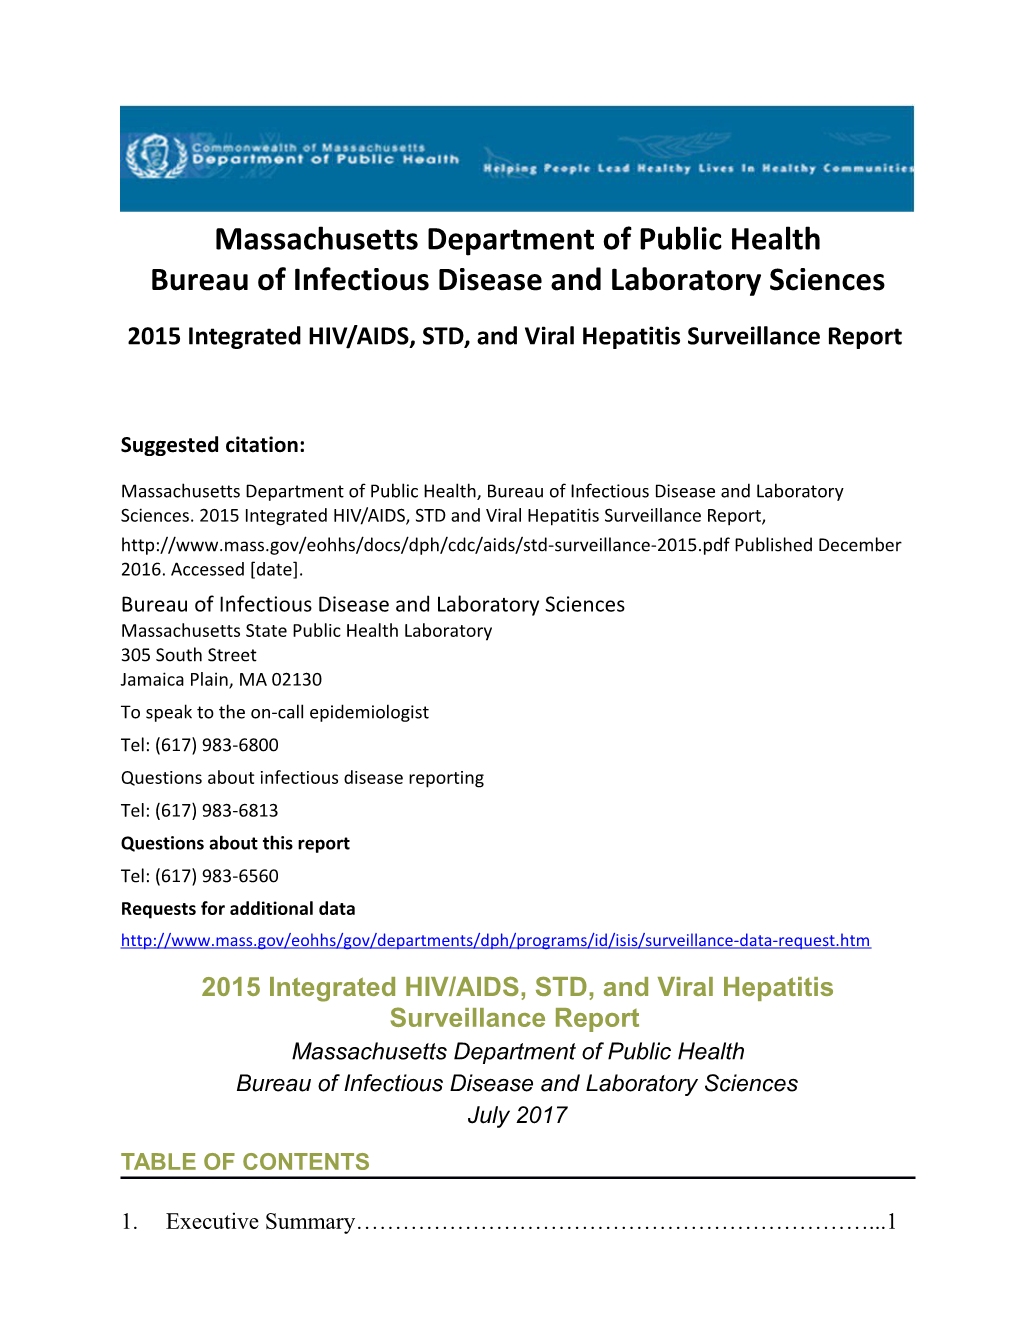 2015 Integrated HIV/AIDS, STD, and Viral Hepatitis Surveillance Report